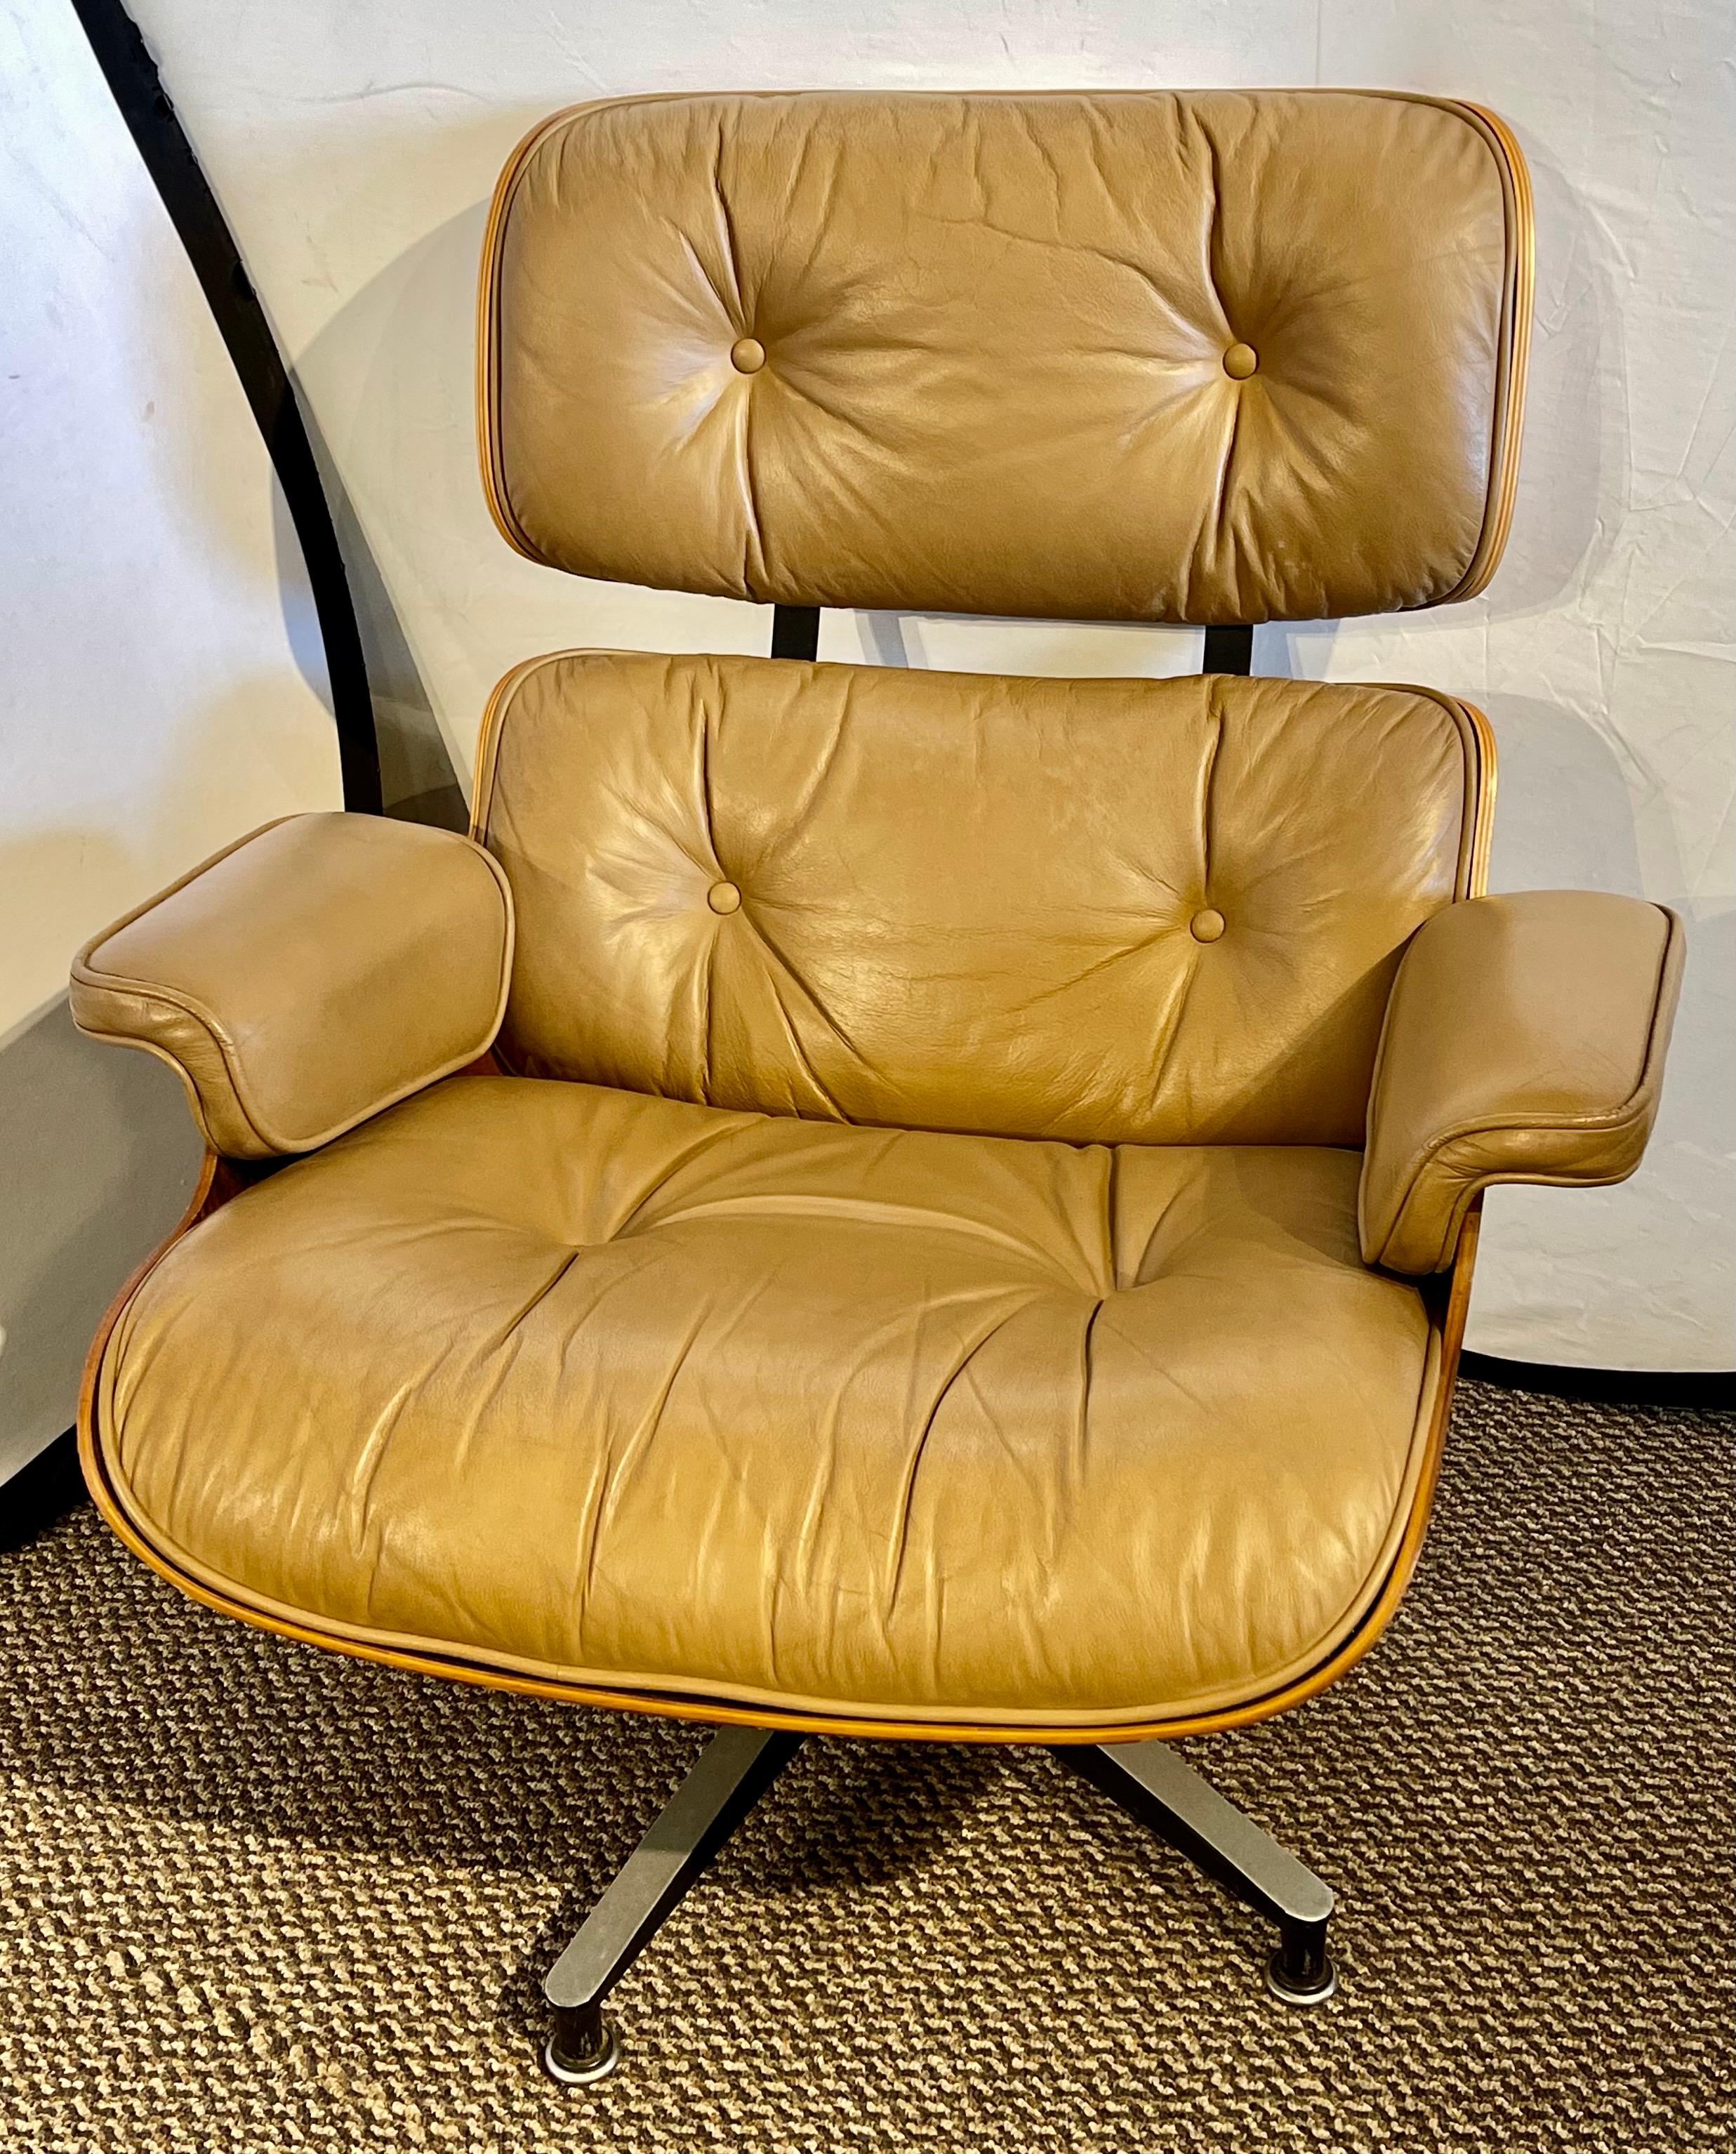 Mid-Century Modern Charles Eames, Herman Miller Midcentury Chair and Ottoman